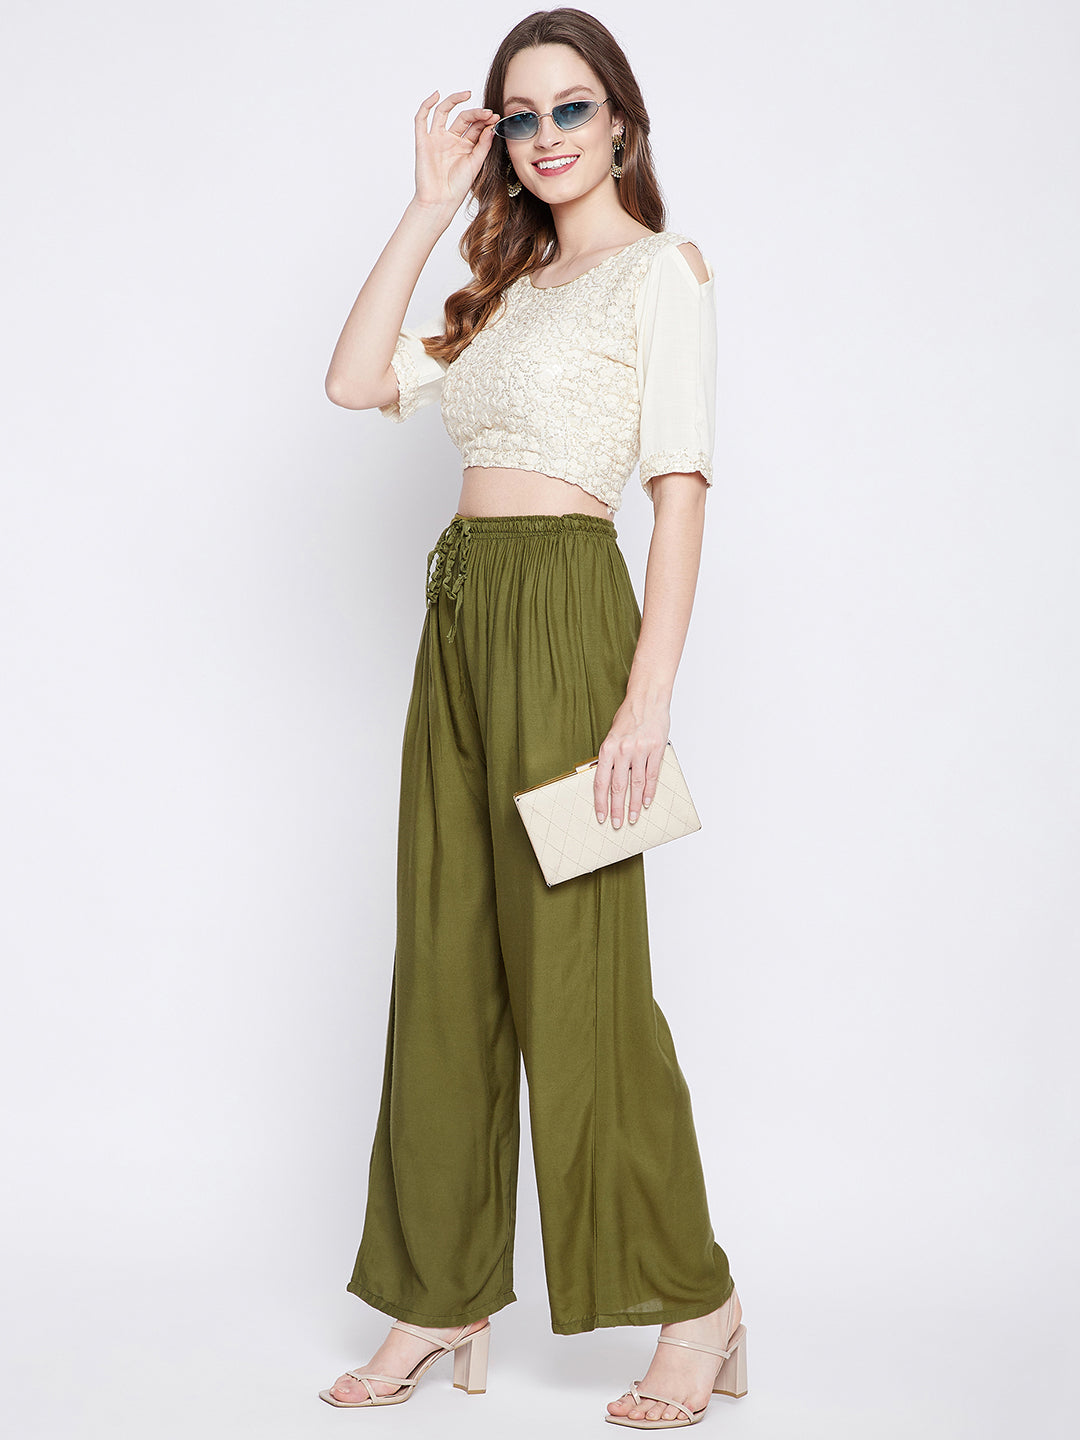 Stylish Olive Green Pants - Chic Wide Leg Pants - Pants - $48.00 – Red  Dress Boutique | Fashion pants, Outfits, Fashion outfits